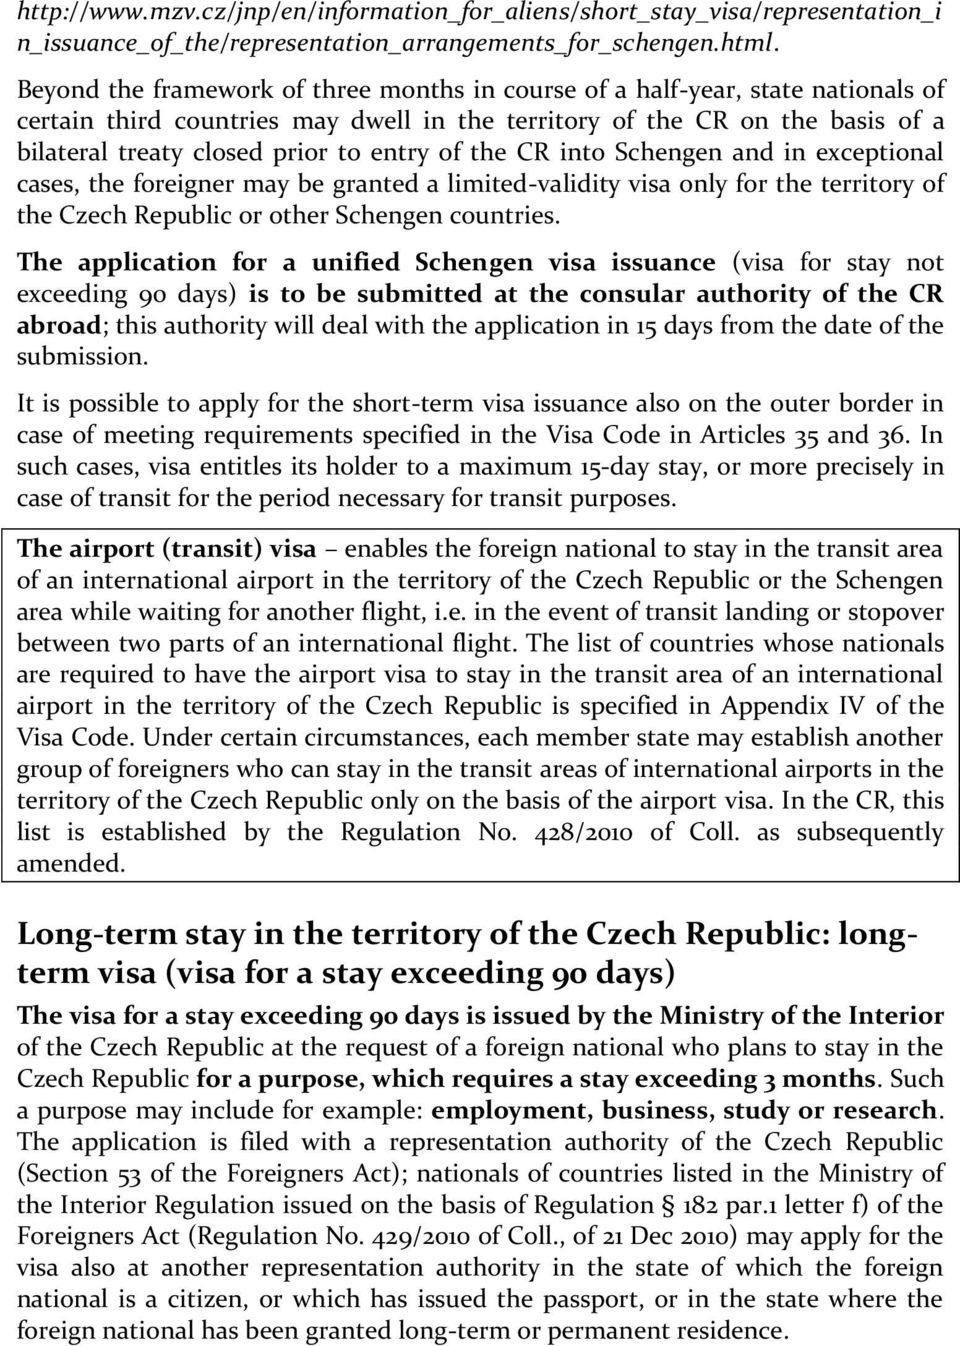 of the CR into Schengen and in exceptional cases, the foreigner may be granted a limited-validity visa only for the territory of the Czech Republic or other Schengen countries.